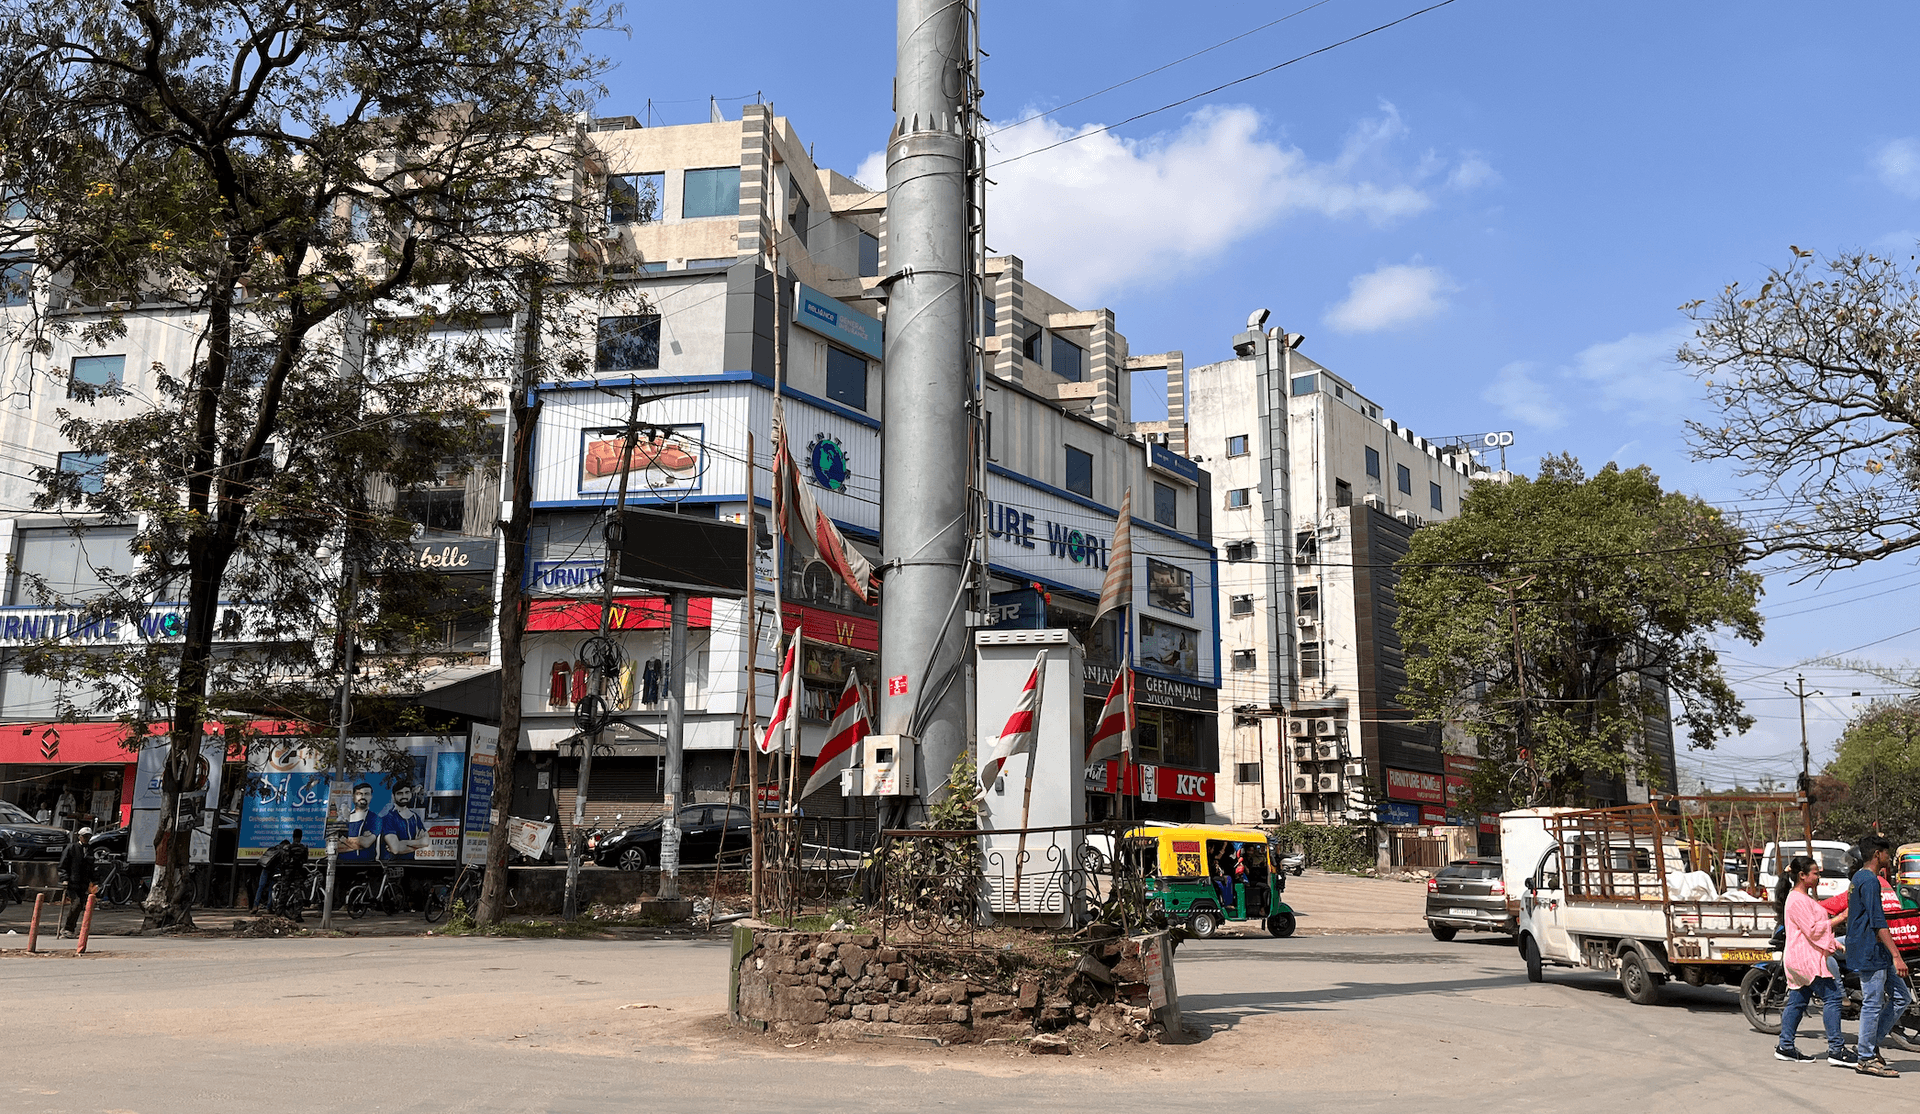 The red-and-white striped flag, a symbol of Adivasi identity, crops up everywhere in Jharkhand, from people's rooftops to traffic circles in the middle of the street.